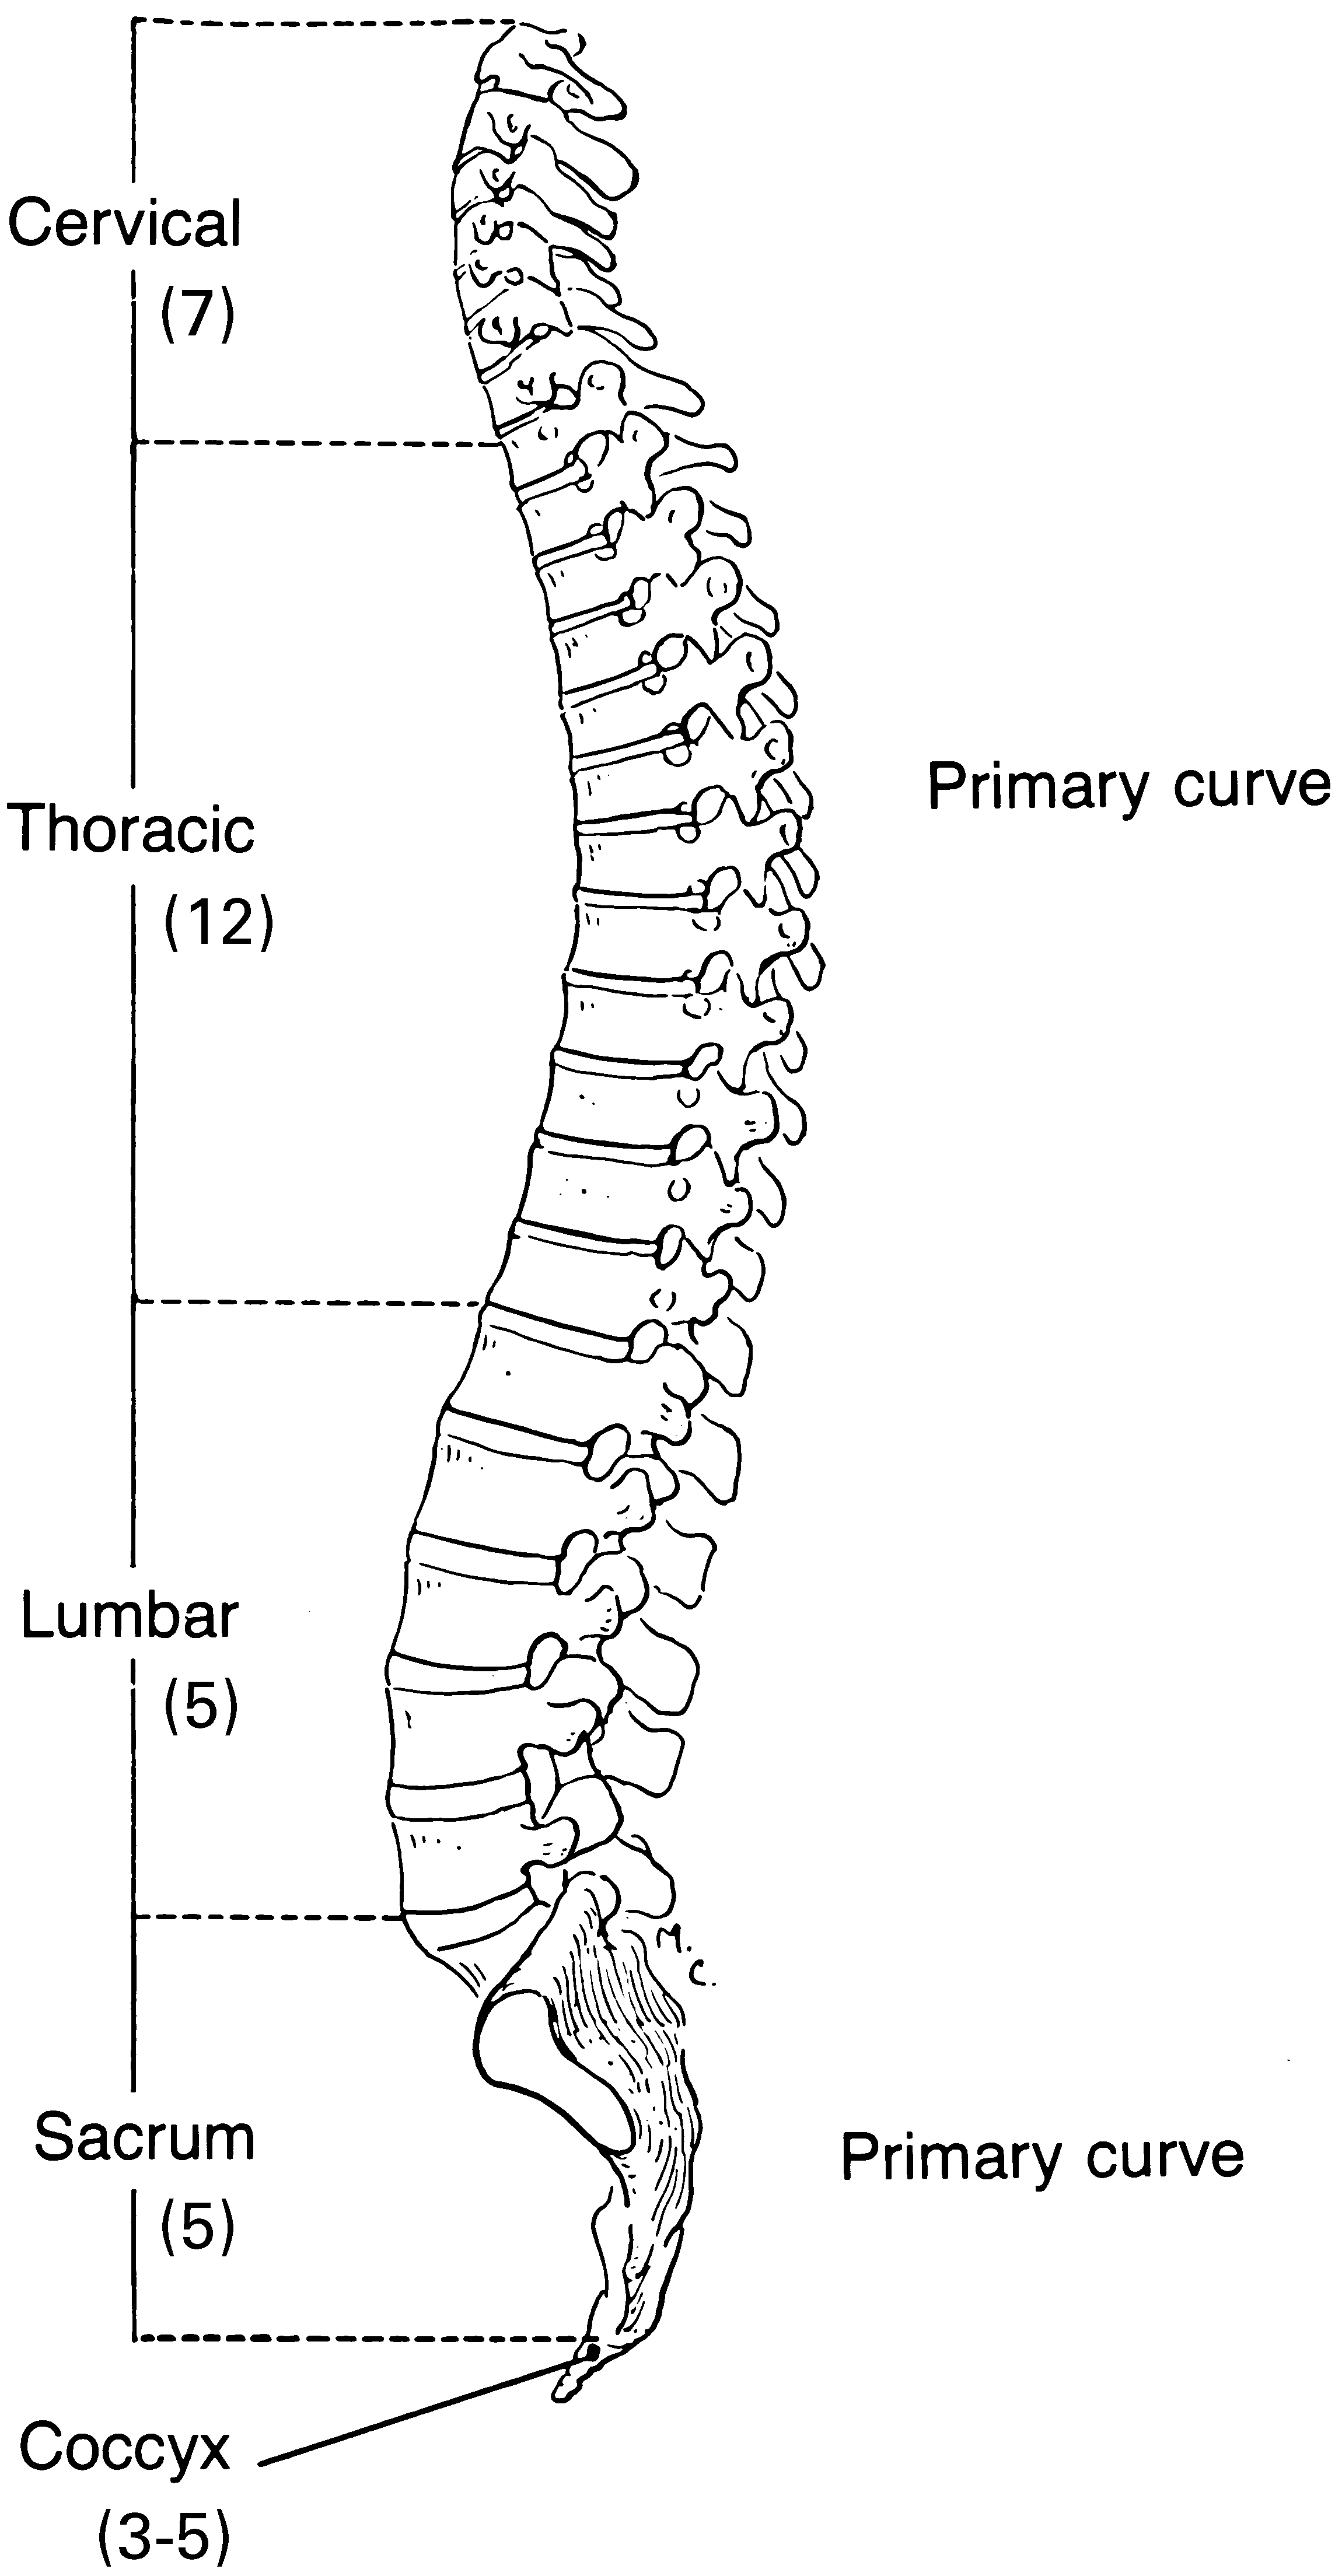 bones-of-the-spine-labeled